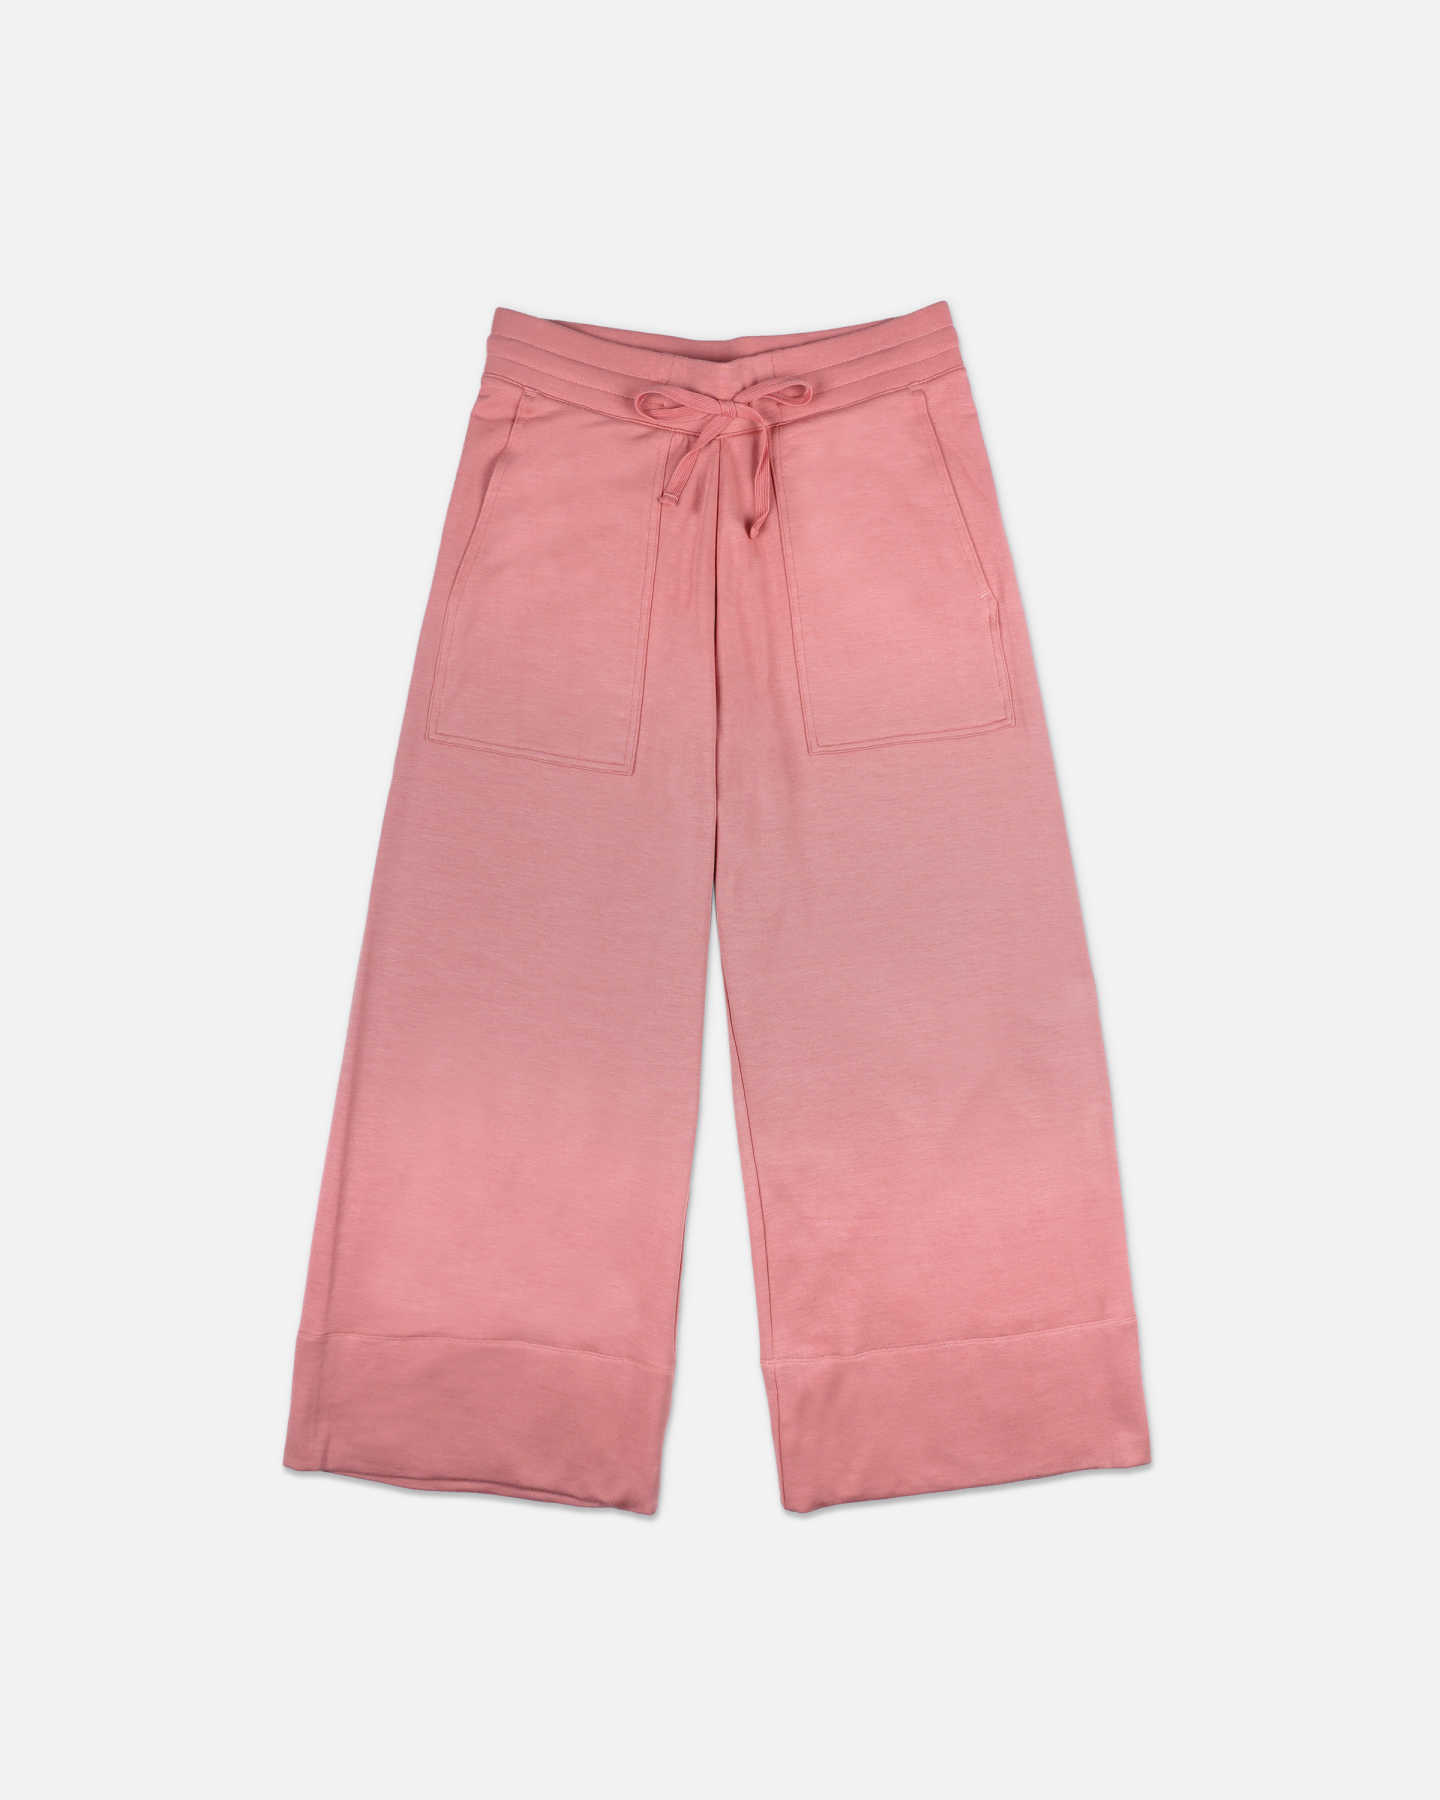 You May Also Like - SuperSoft Fleece Wide Leg Pants - Dusty Pink